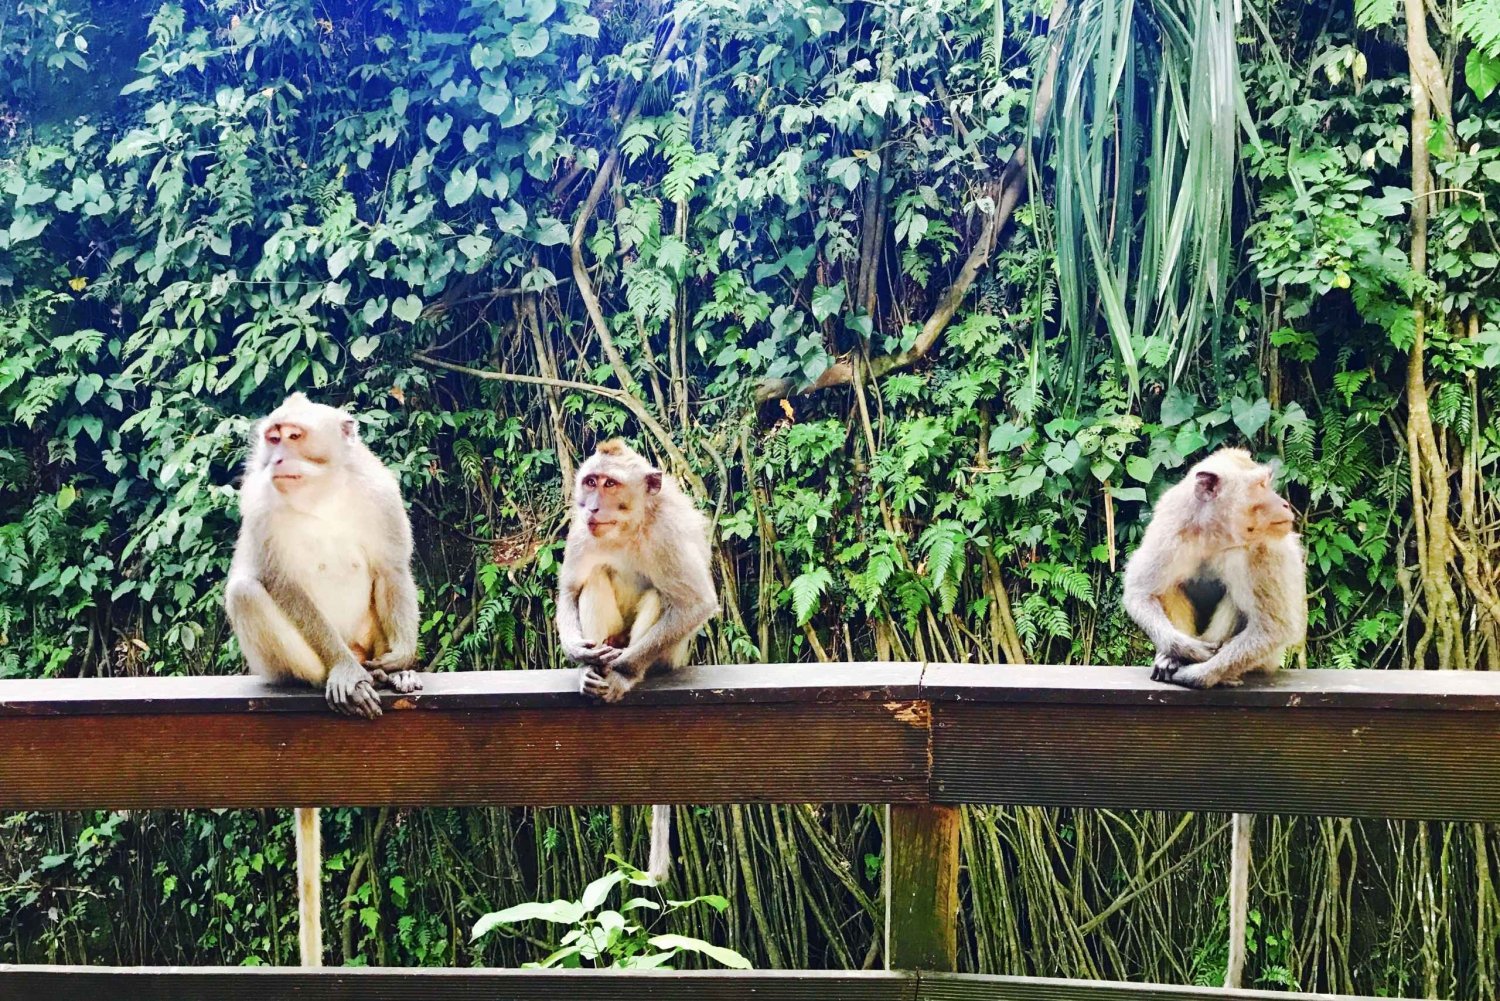 Ubud: Monkey Forest Sanctuary and Jungle Swing Private Tour